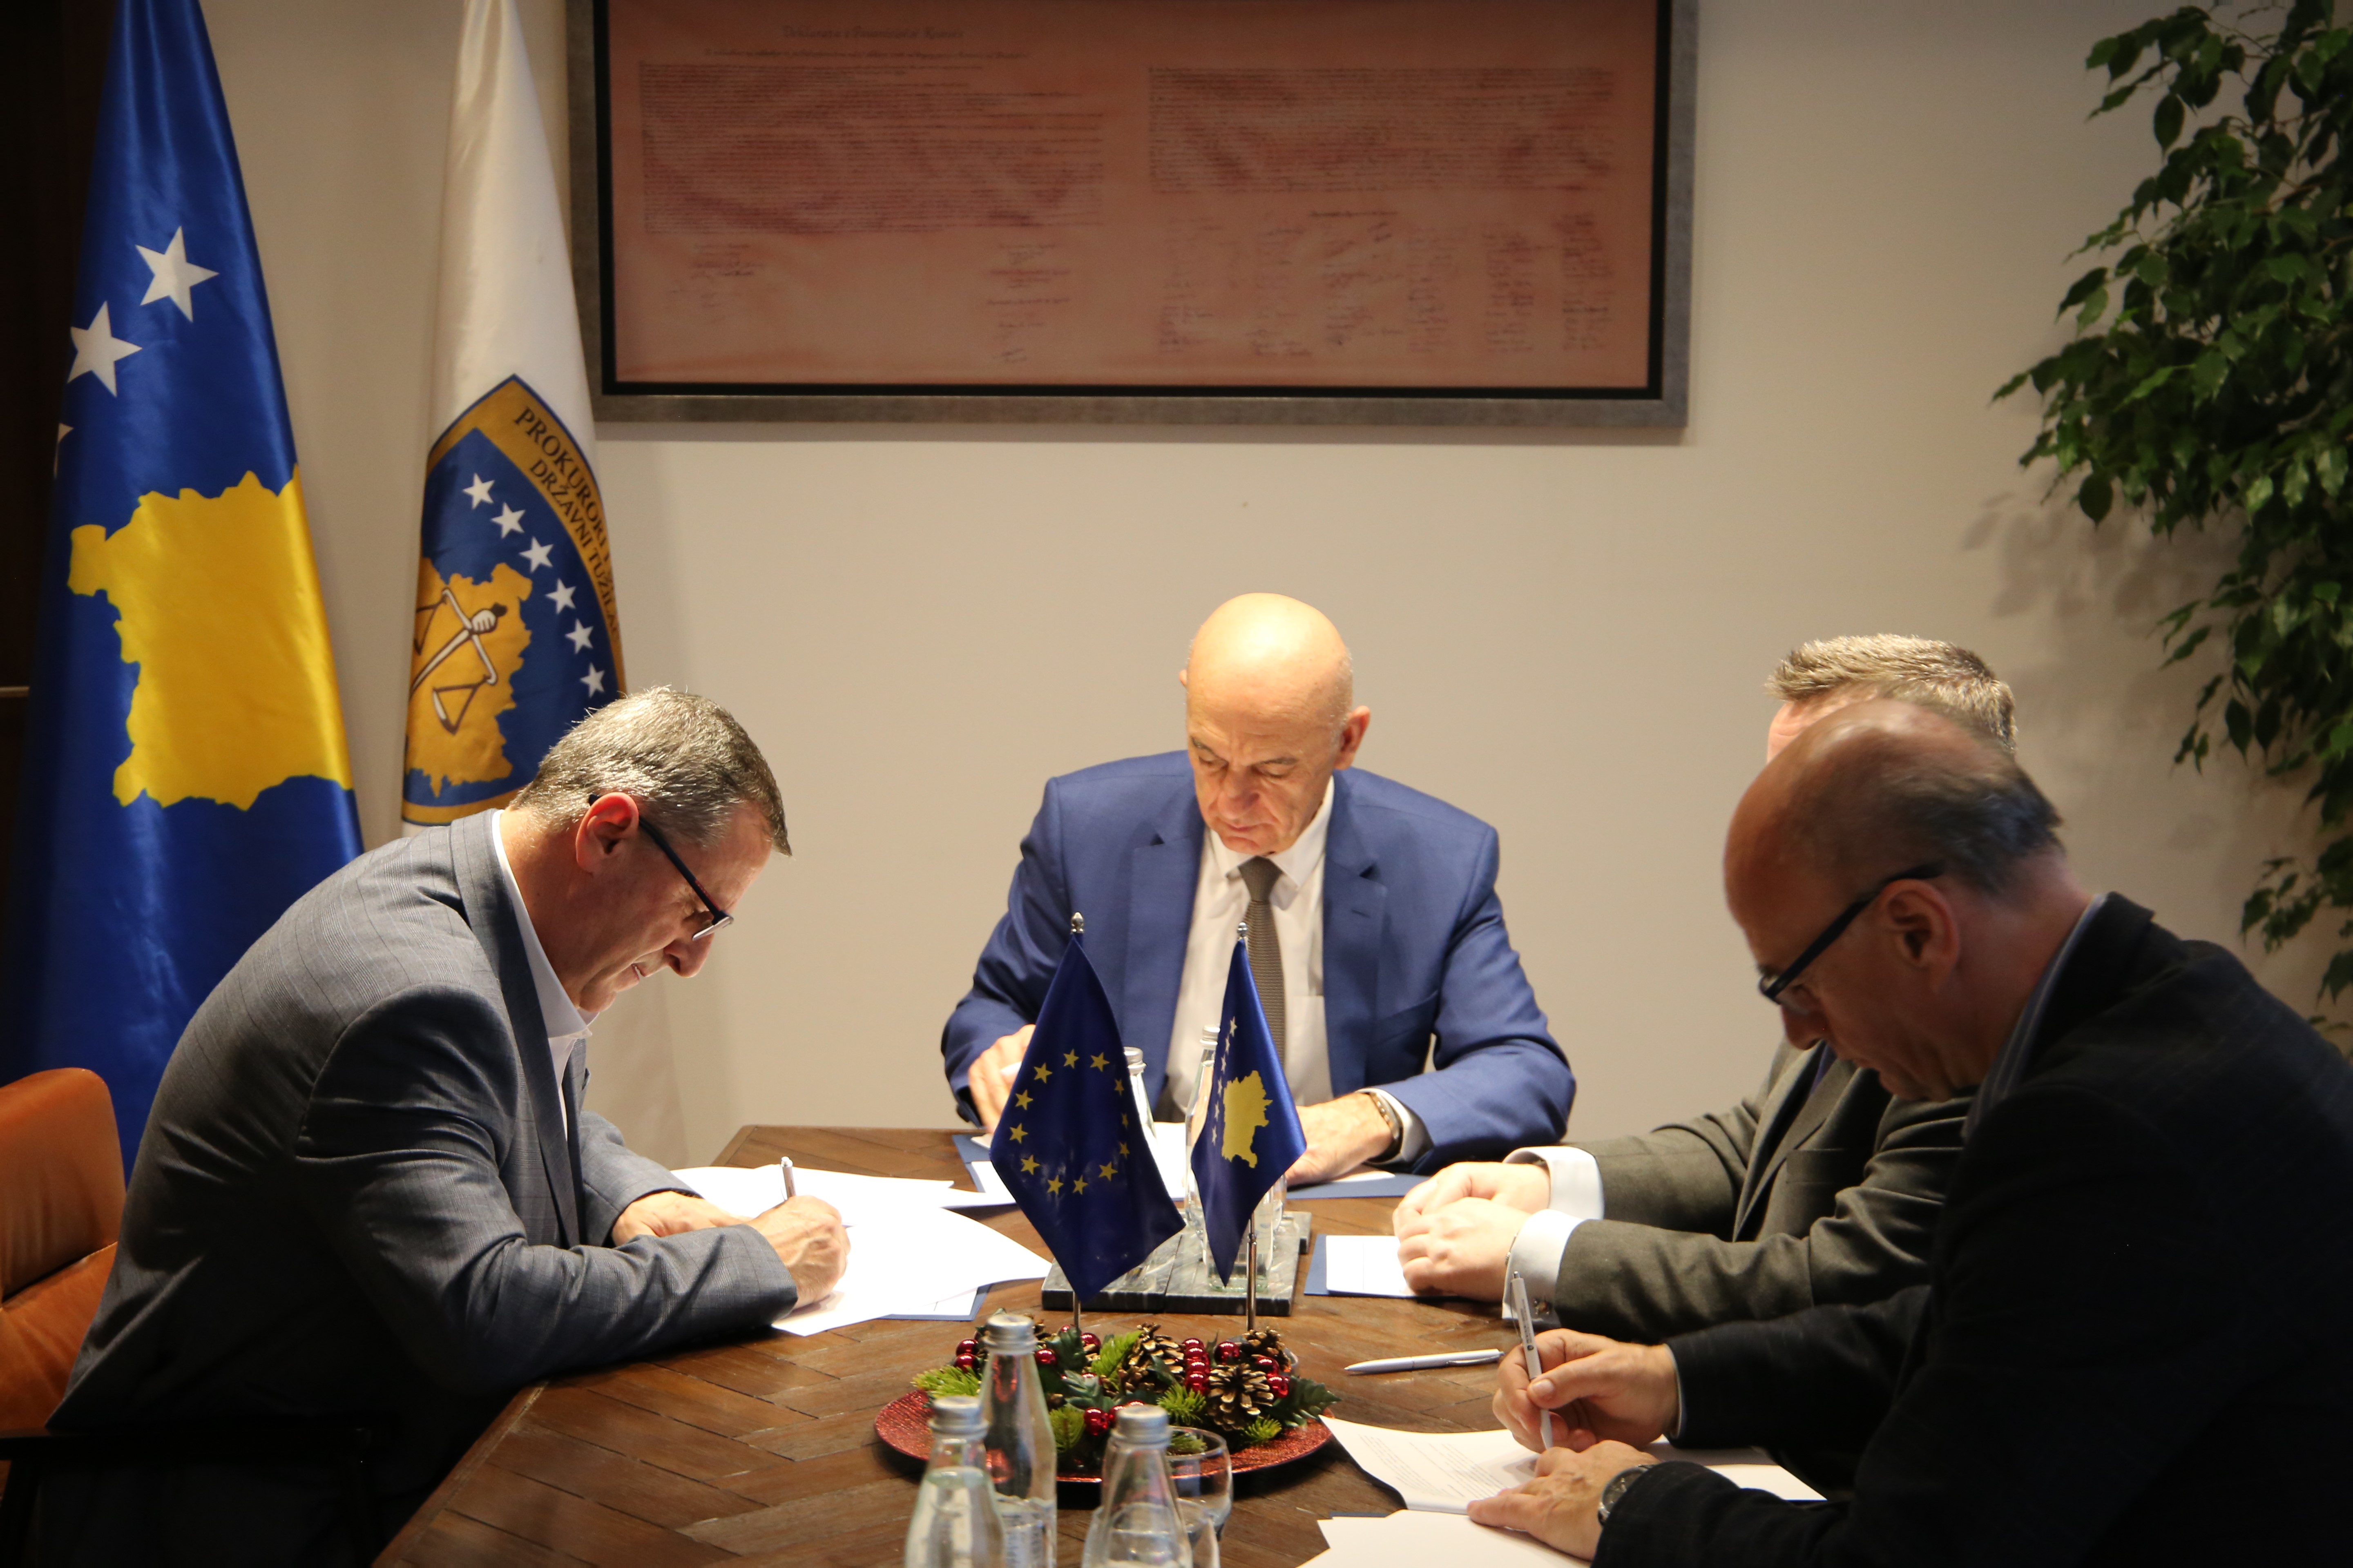 The State Prosecutor and the Council of Europe sign a cooperation memorandum for the exchange of experiences in the field of investigation and prosecution against money laundering